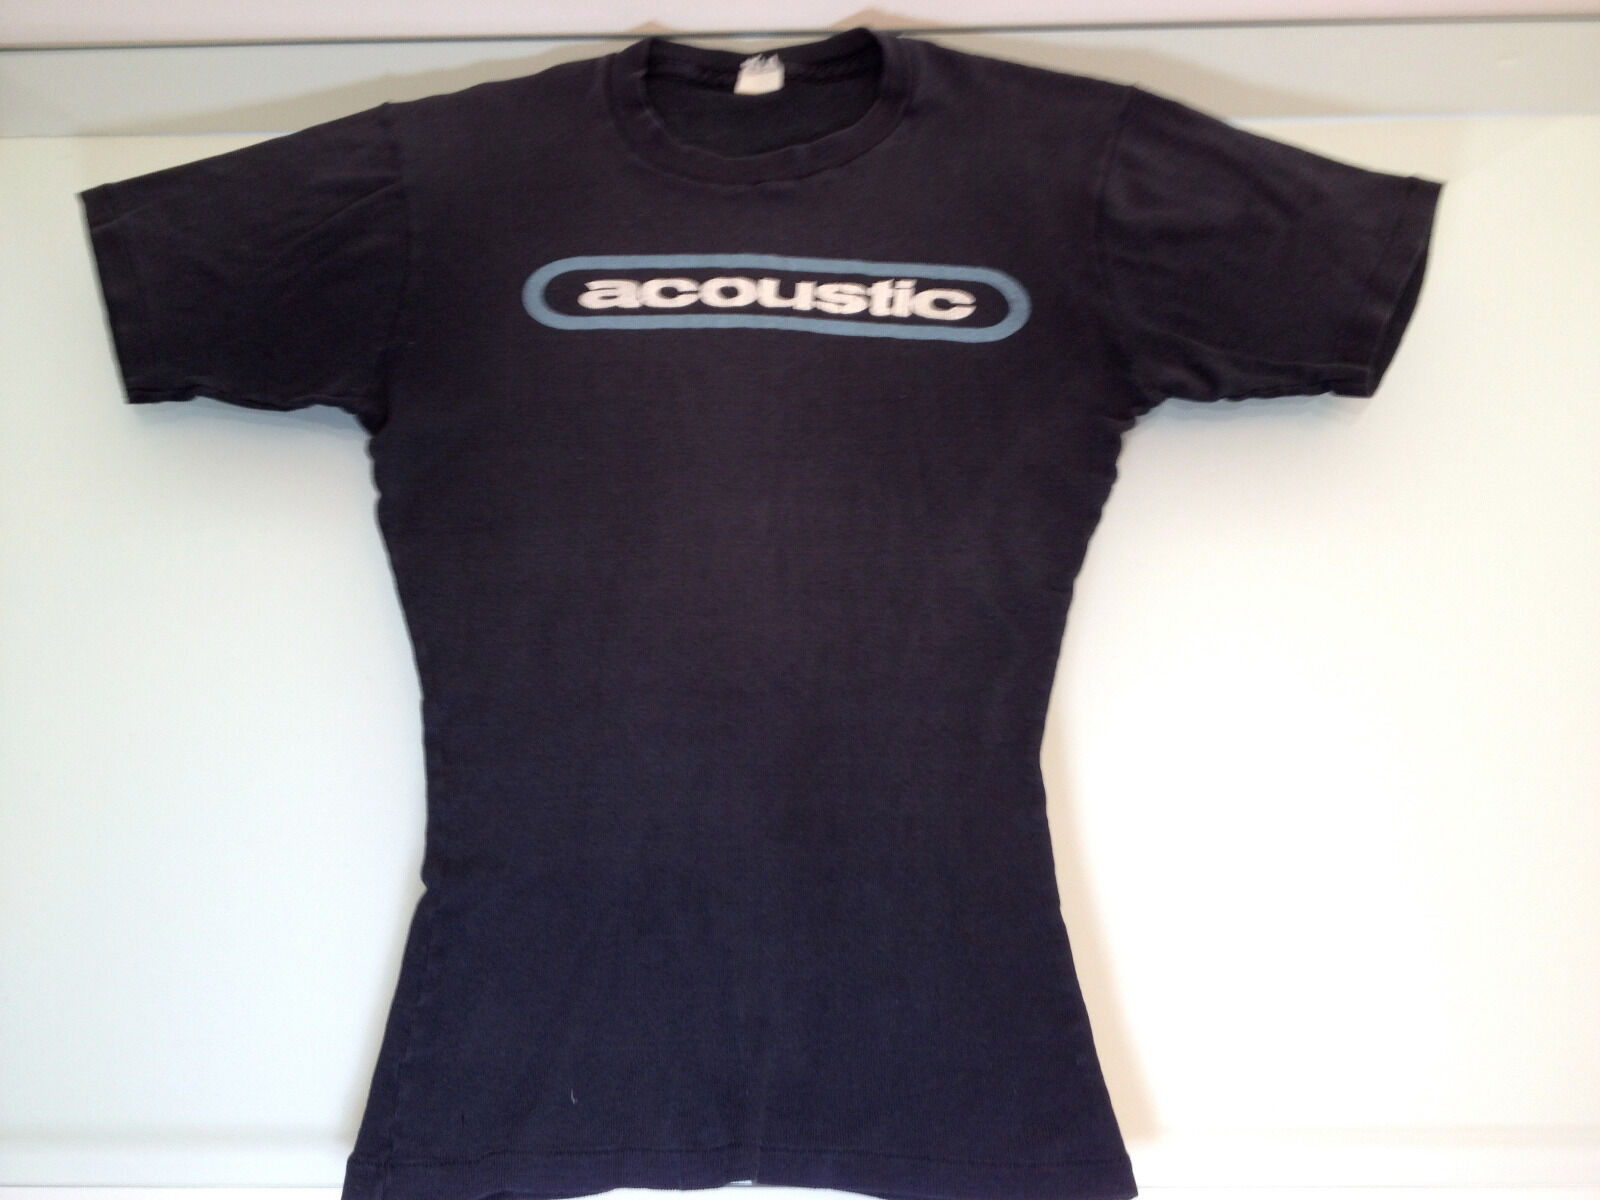 Vintage (Small) Acoustic T-shirt. Decent shape for a T-shirt from the 1970\'s